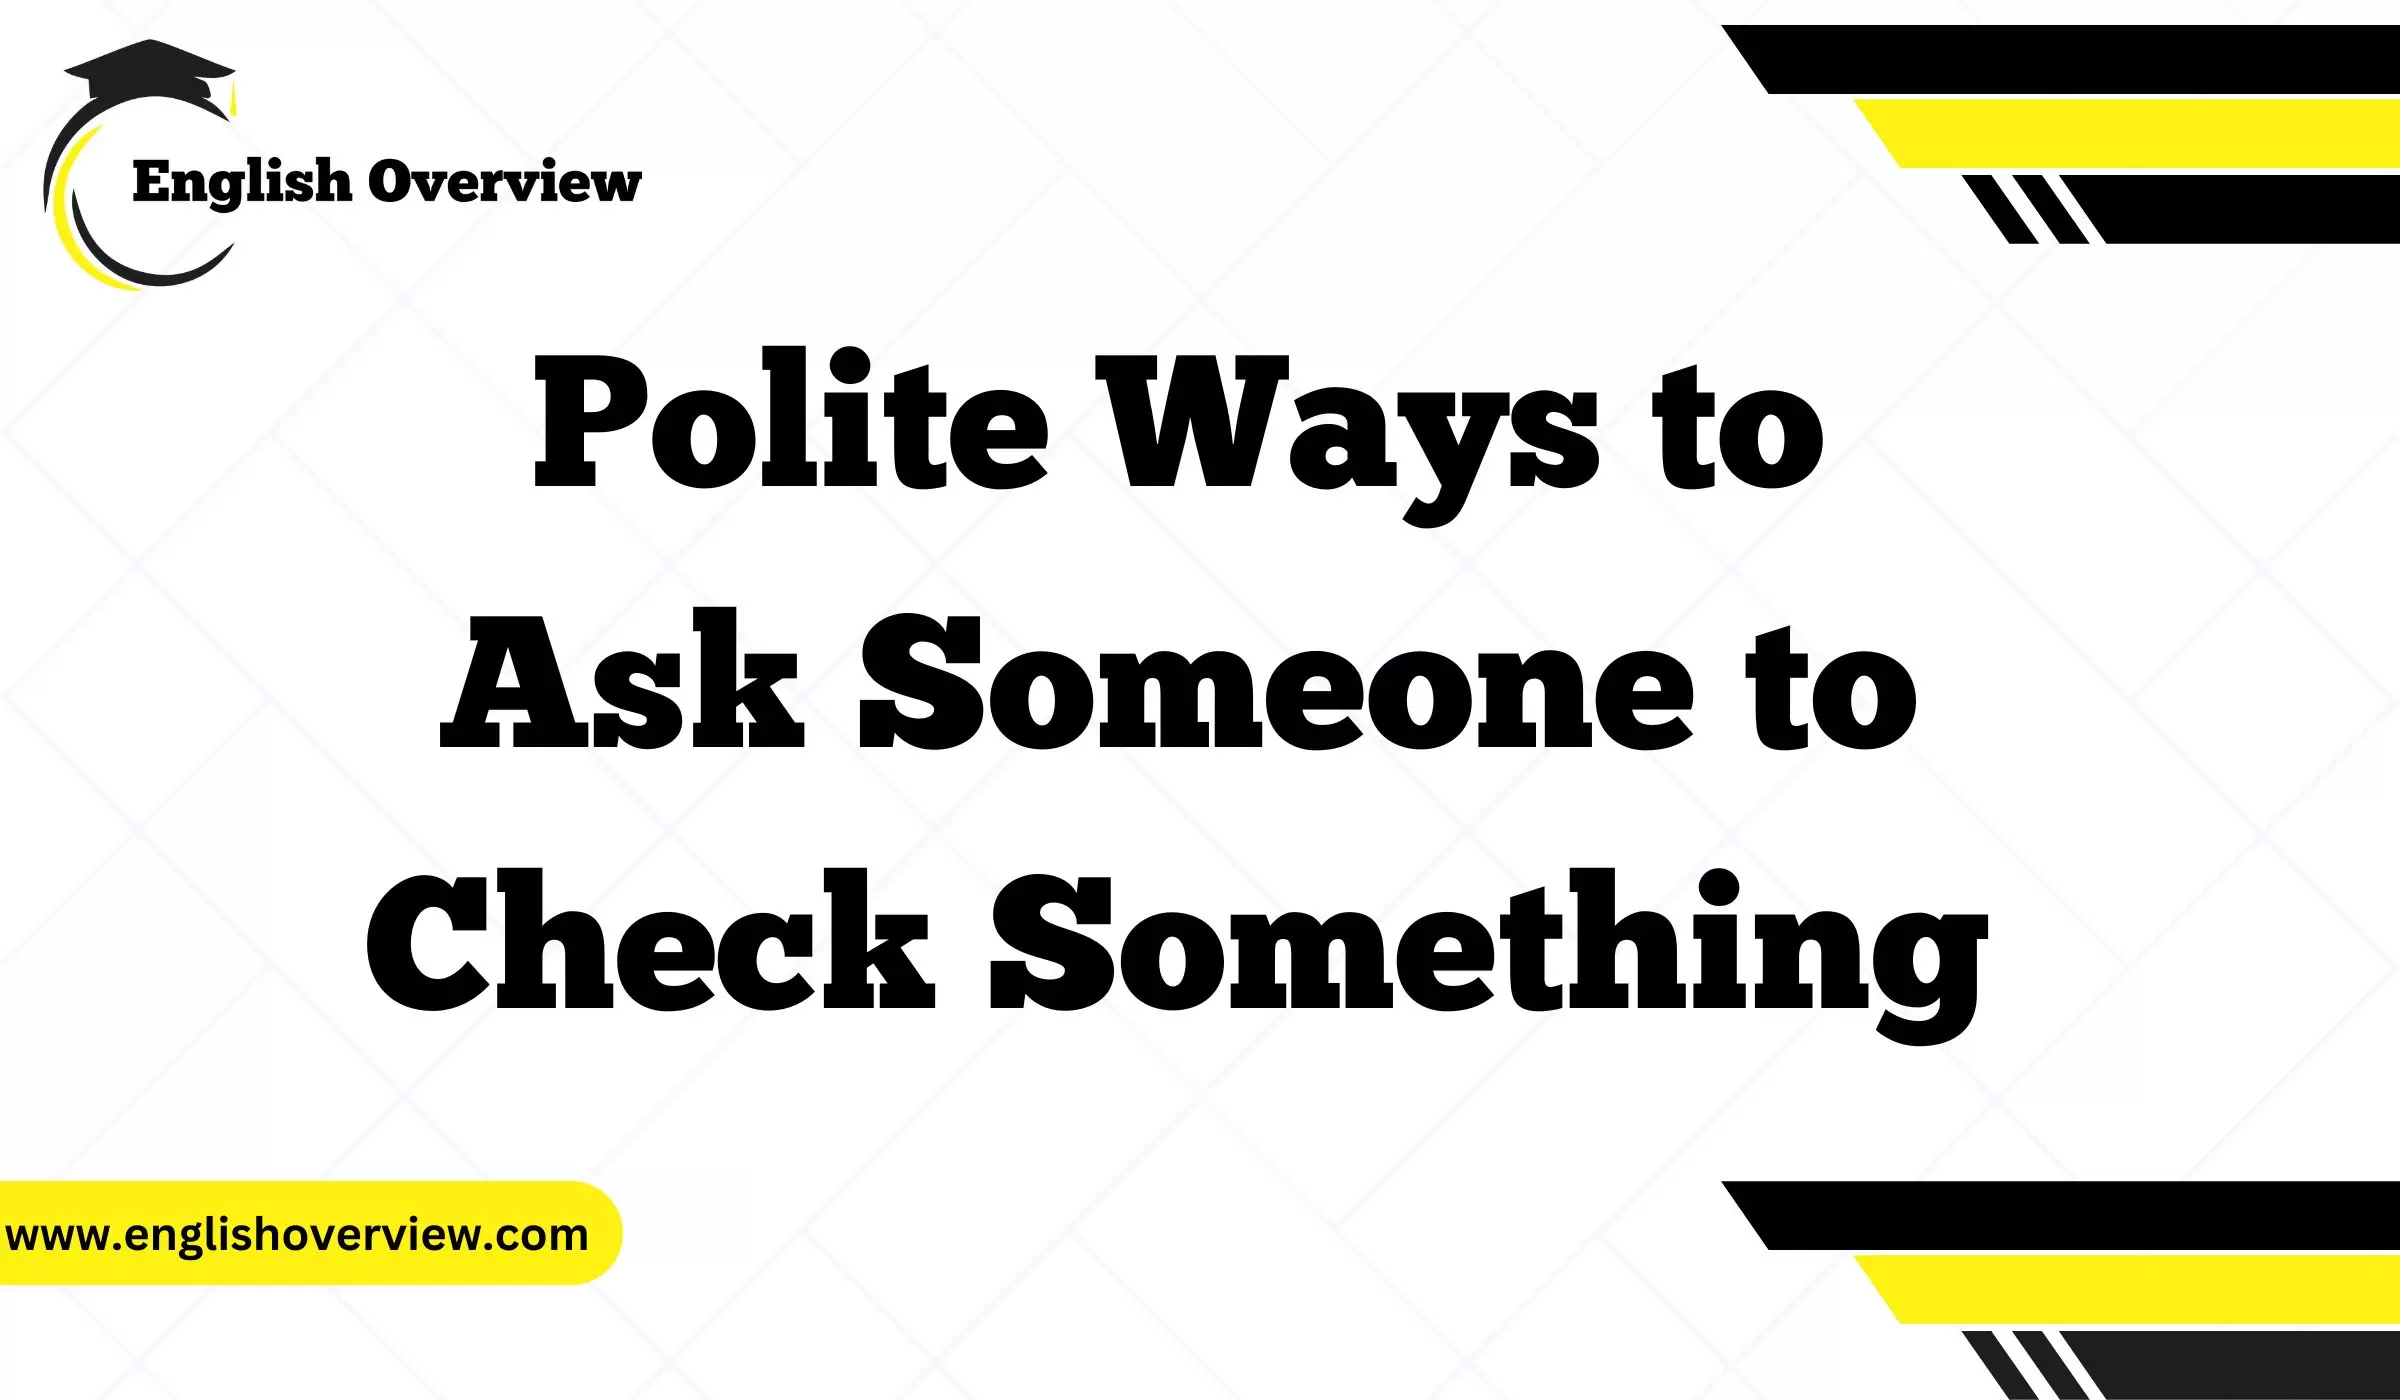 Polite Ways to Ask Someone to Check Something